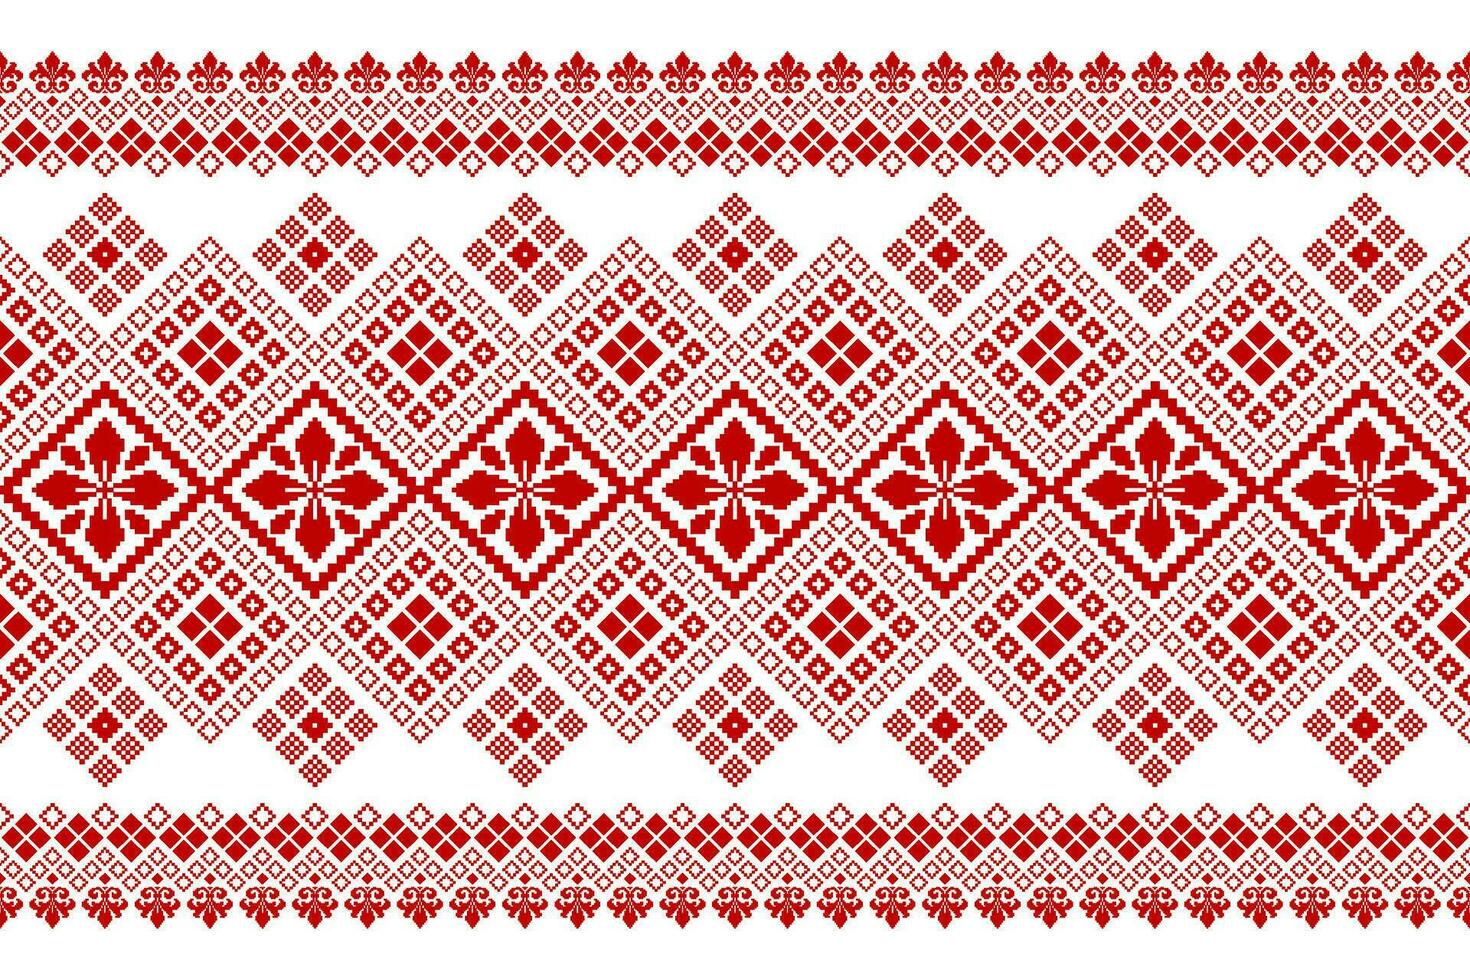 Red Cross stitch colorful geometric traditional ethnic pattern Ikat seamless pattern abstract design for fabric print cloth dress carpet curtains and sarong Aztec African Indian Indonesian vector